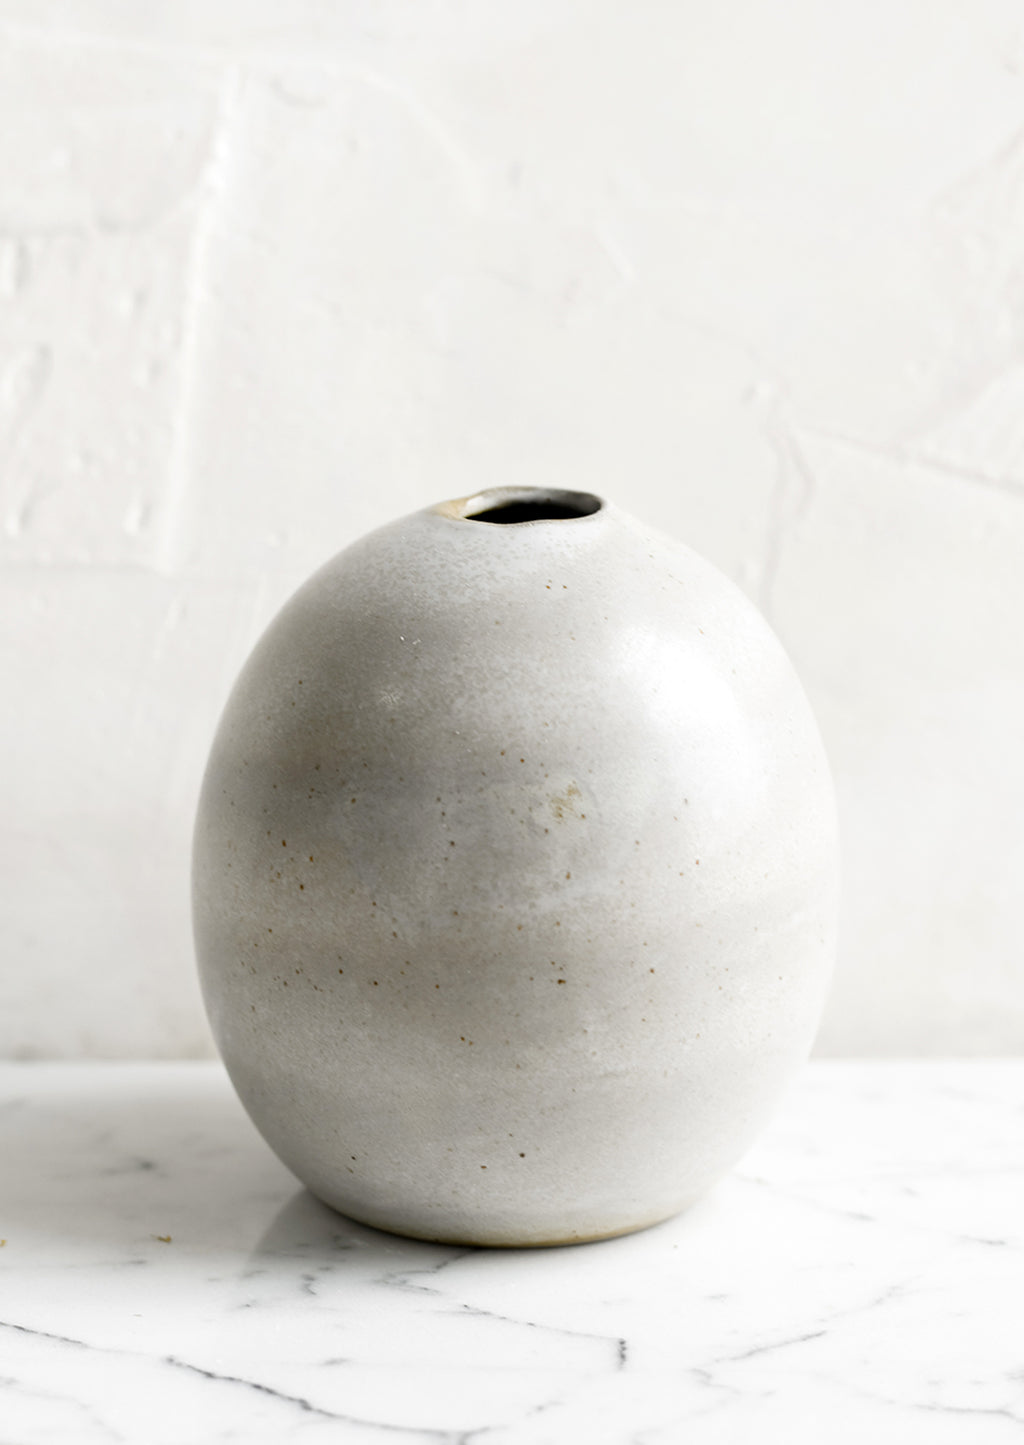 2: A round bud vase in grey ceramic with soft speckles.